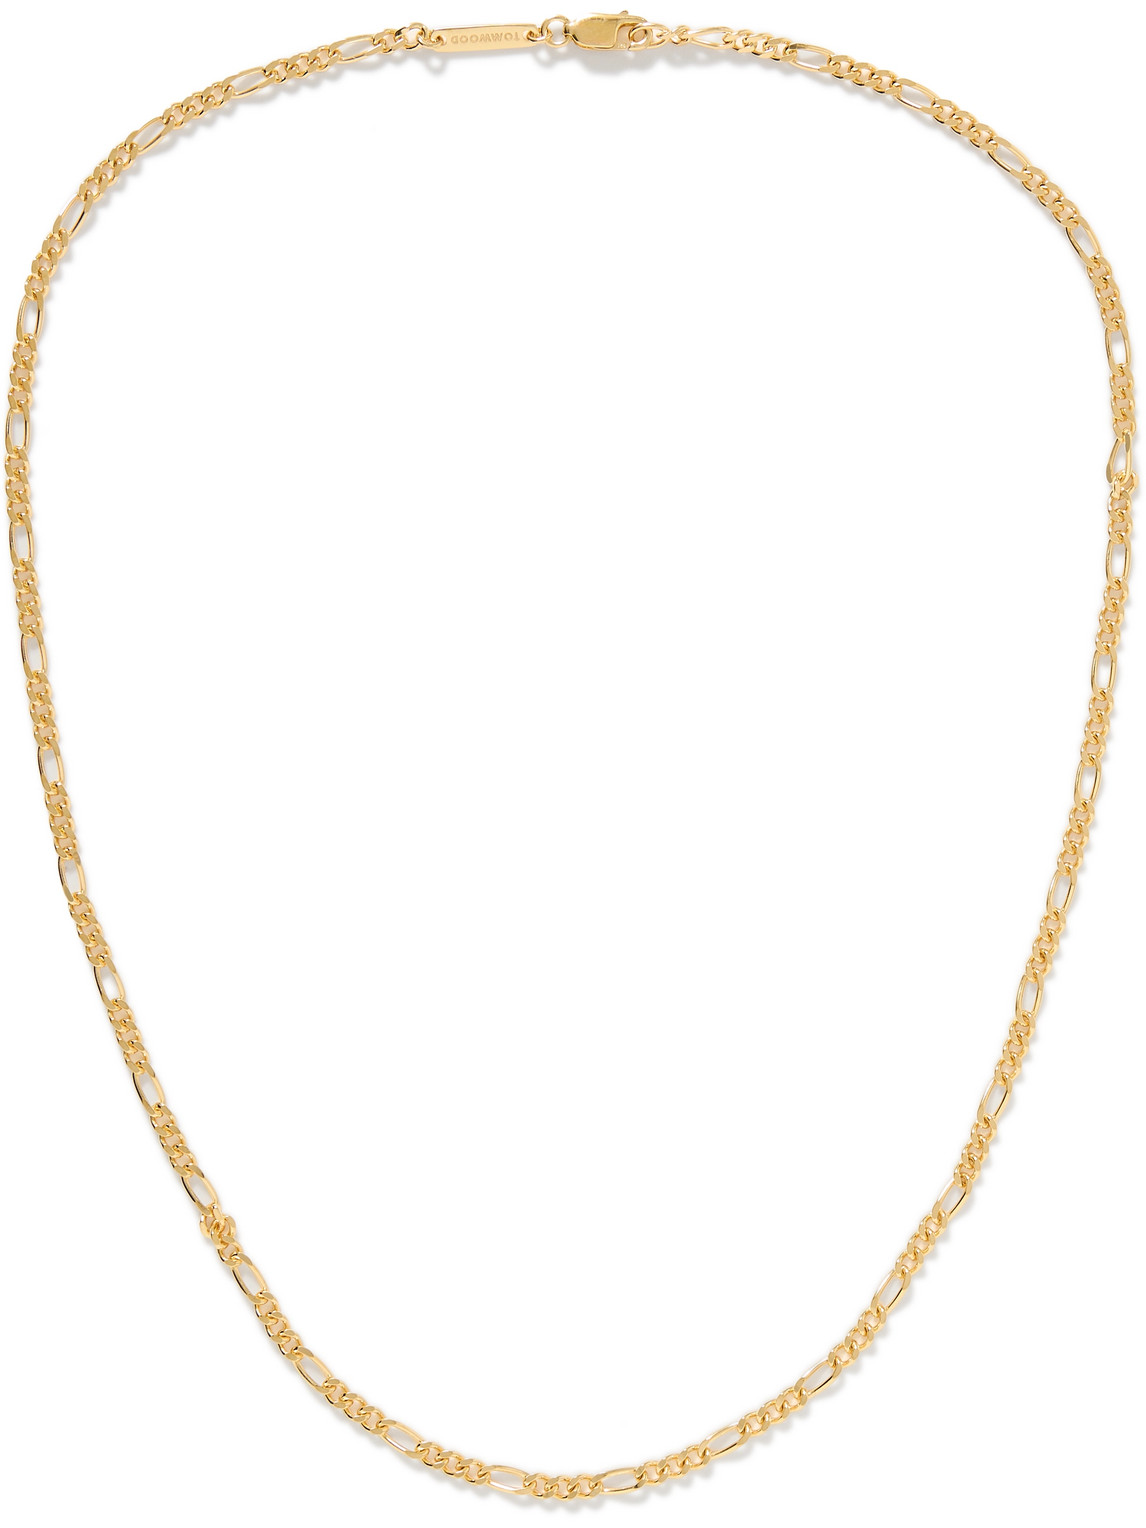 Tom Wood - Bo Slim Recycled Gold-Plated Chain Necklace - Men - Gold von Tom Wood